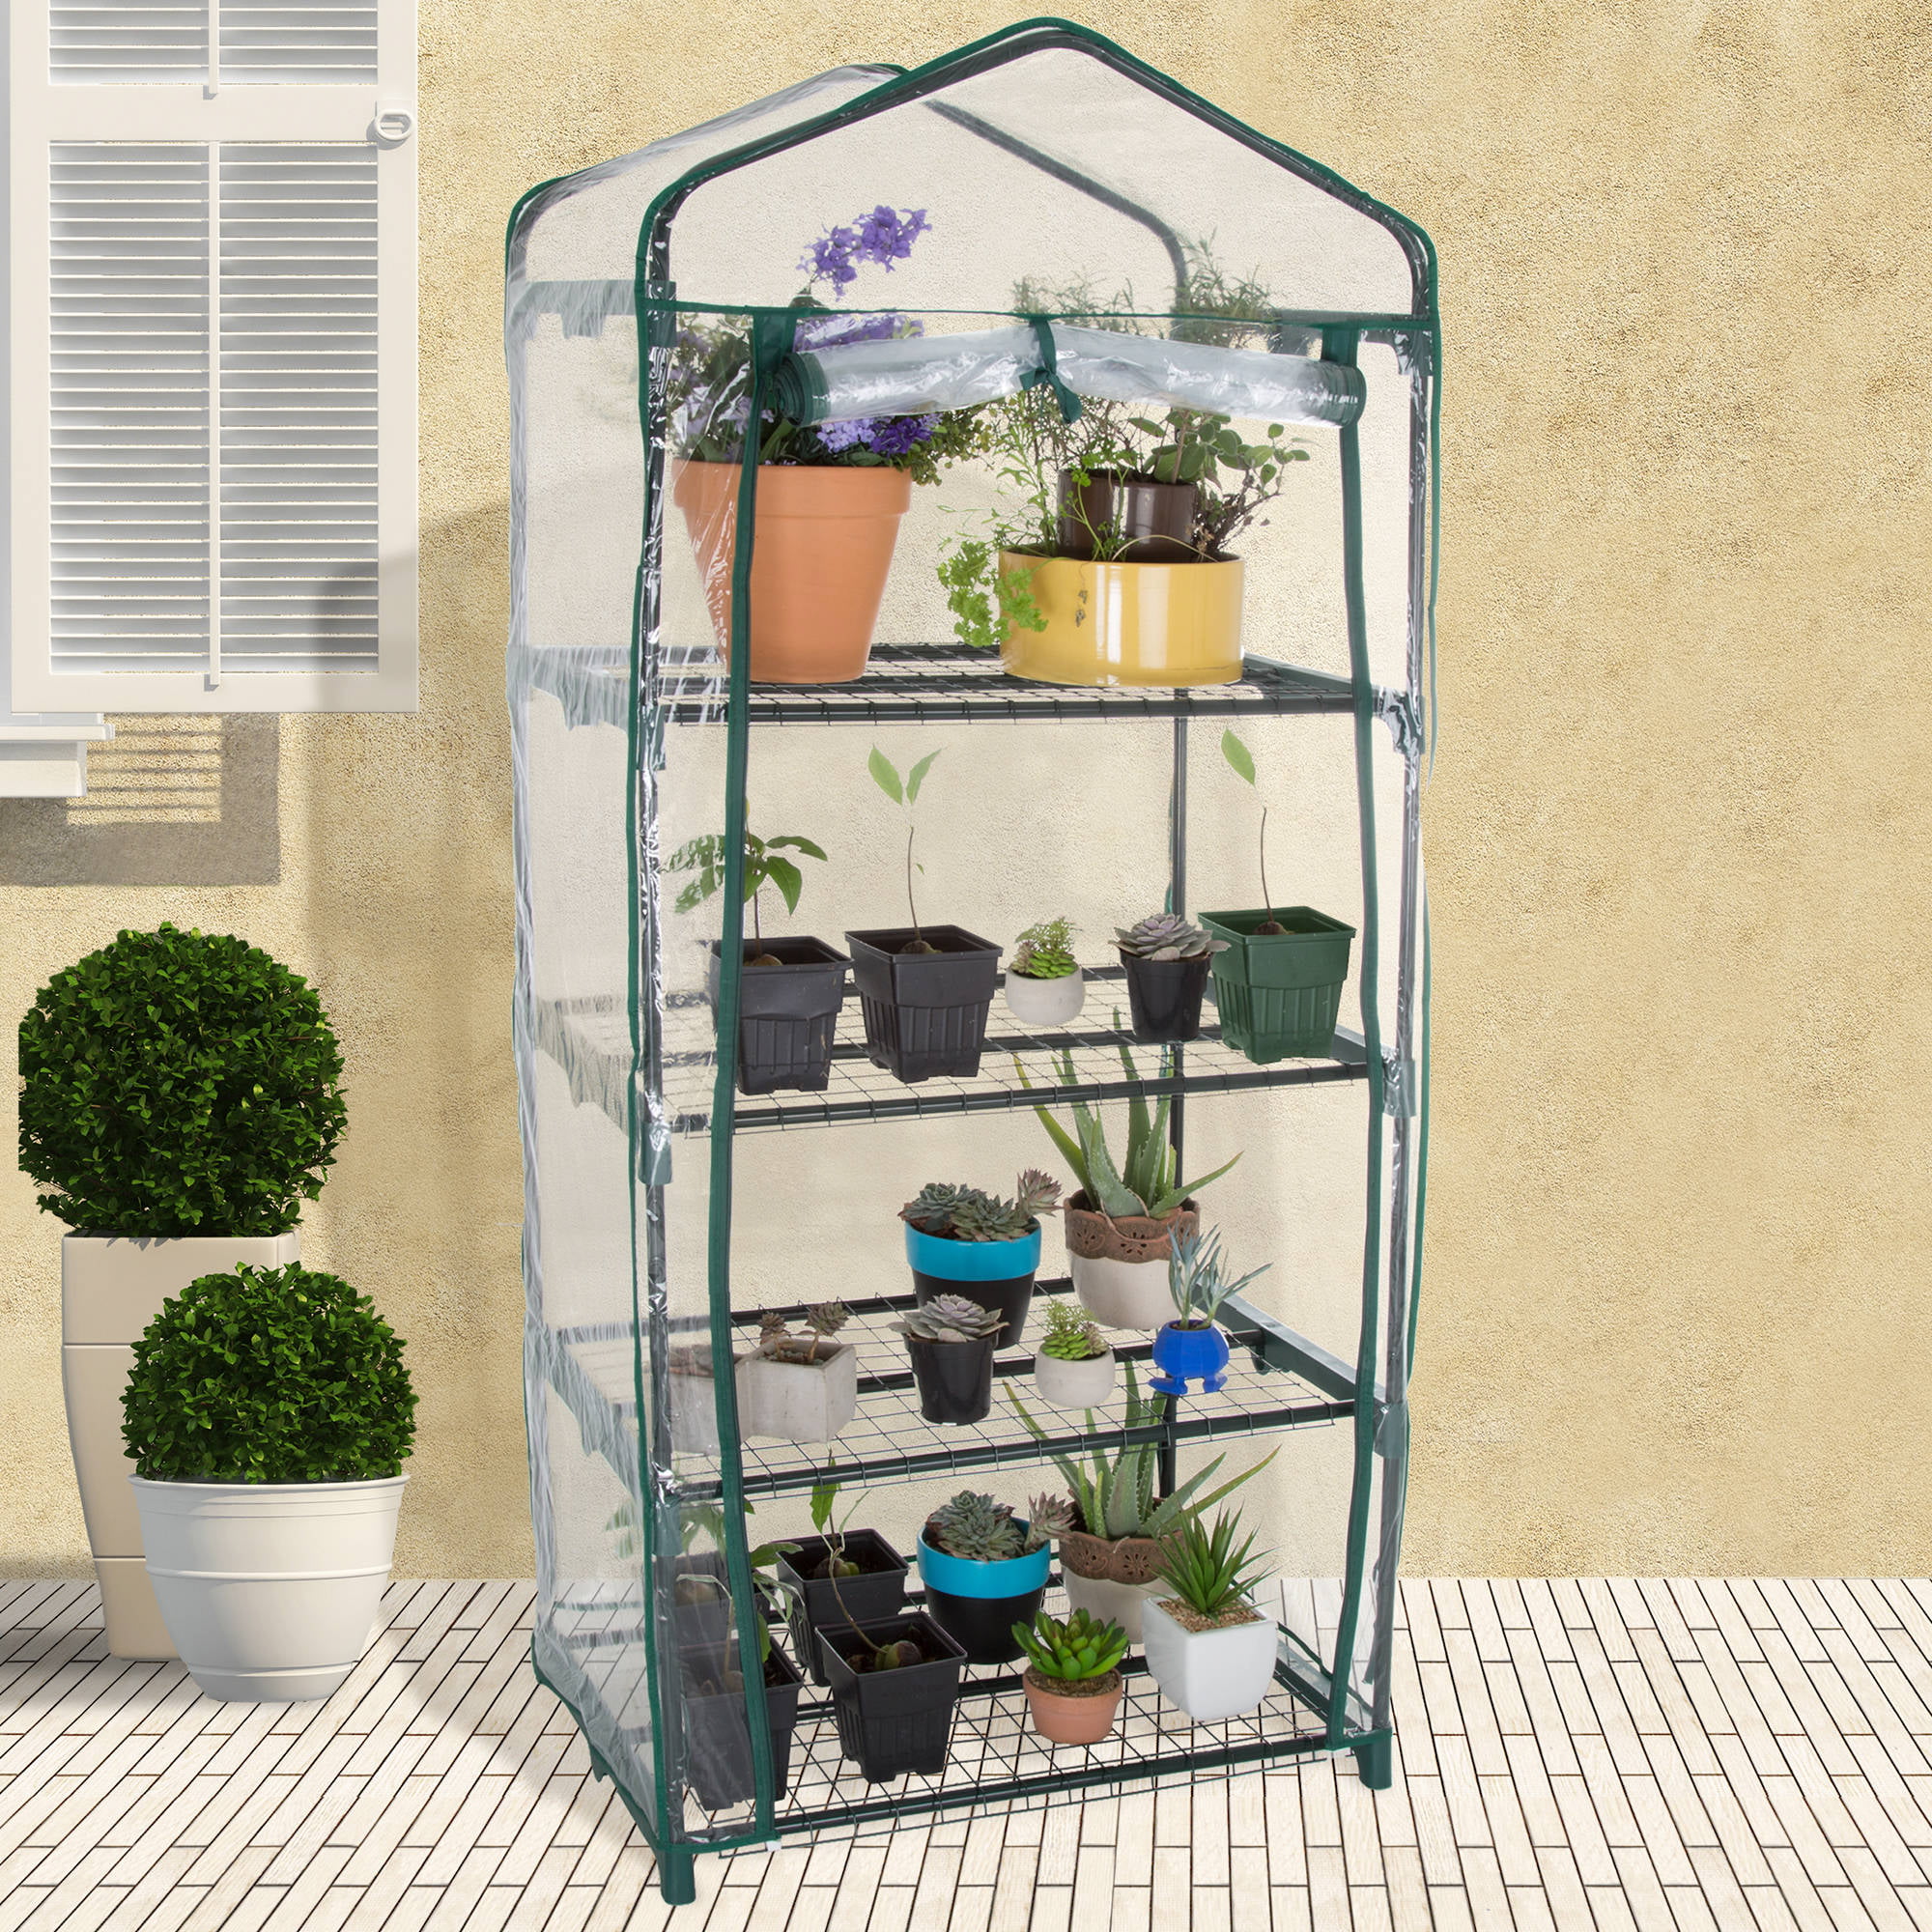 NEW GREENHOUSE COLD FRAME 4 TIER WITH SHELVING & REINFORCED COVER OUTDOOR GARDEN 